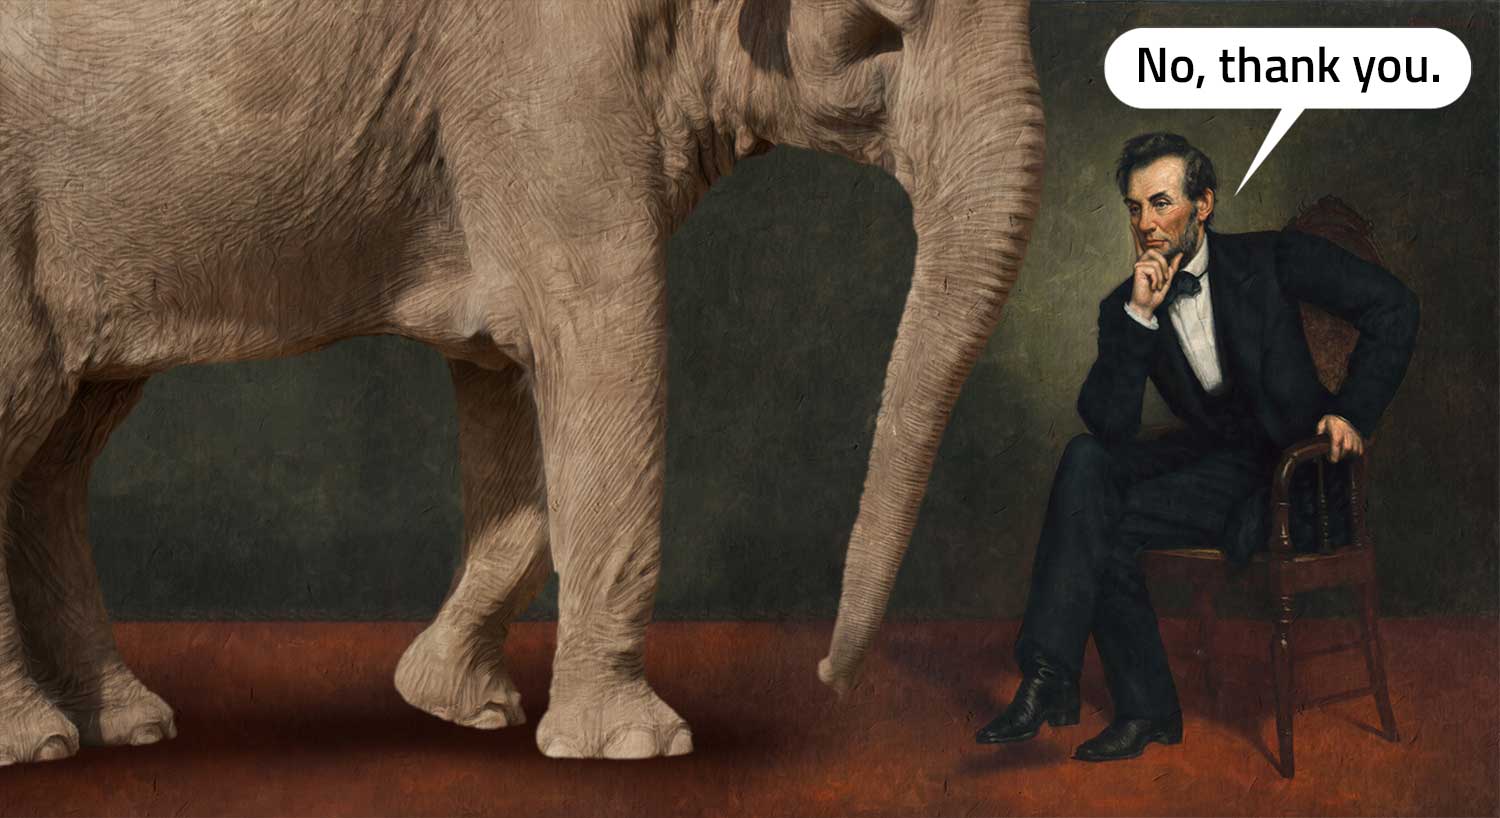 Mockup of an Asian elephant standing next to a seated Abraham Lincoln, who says no thank you.